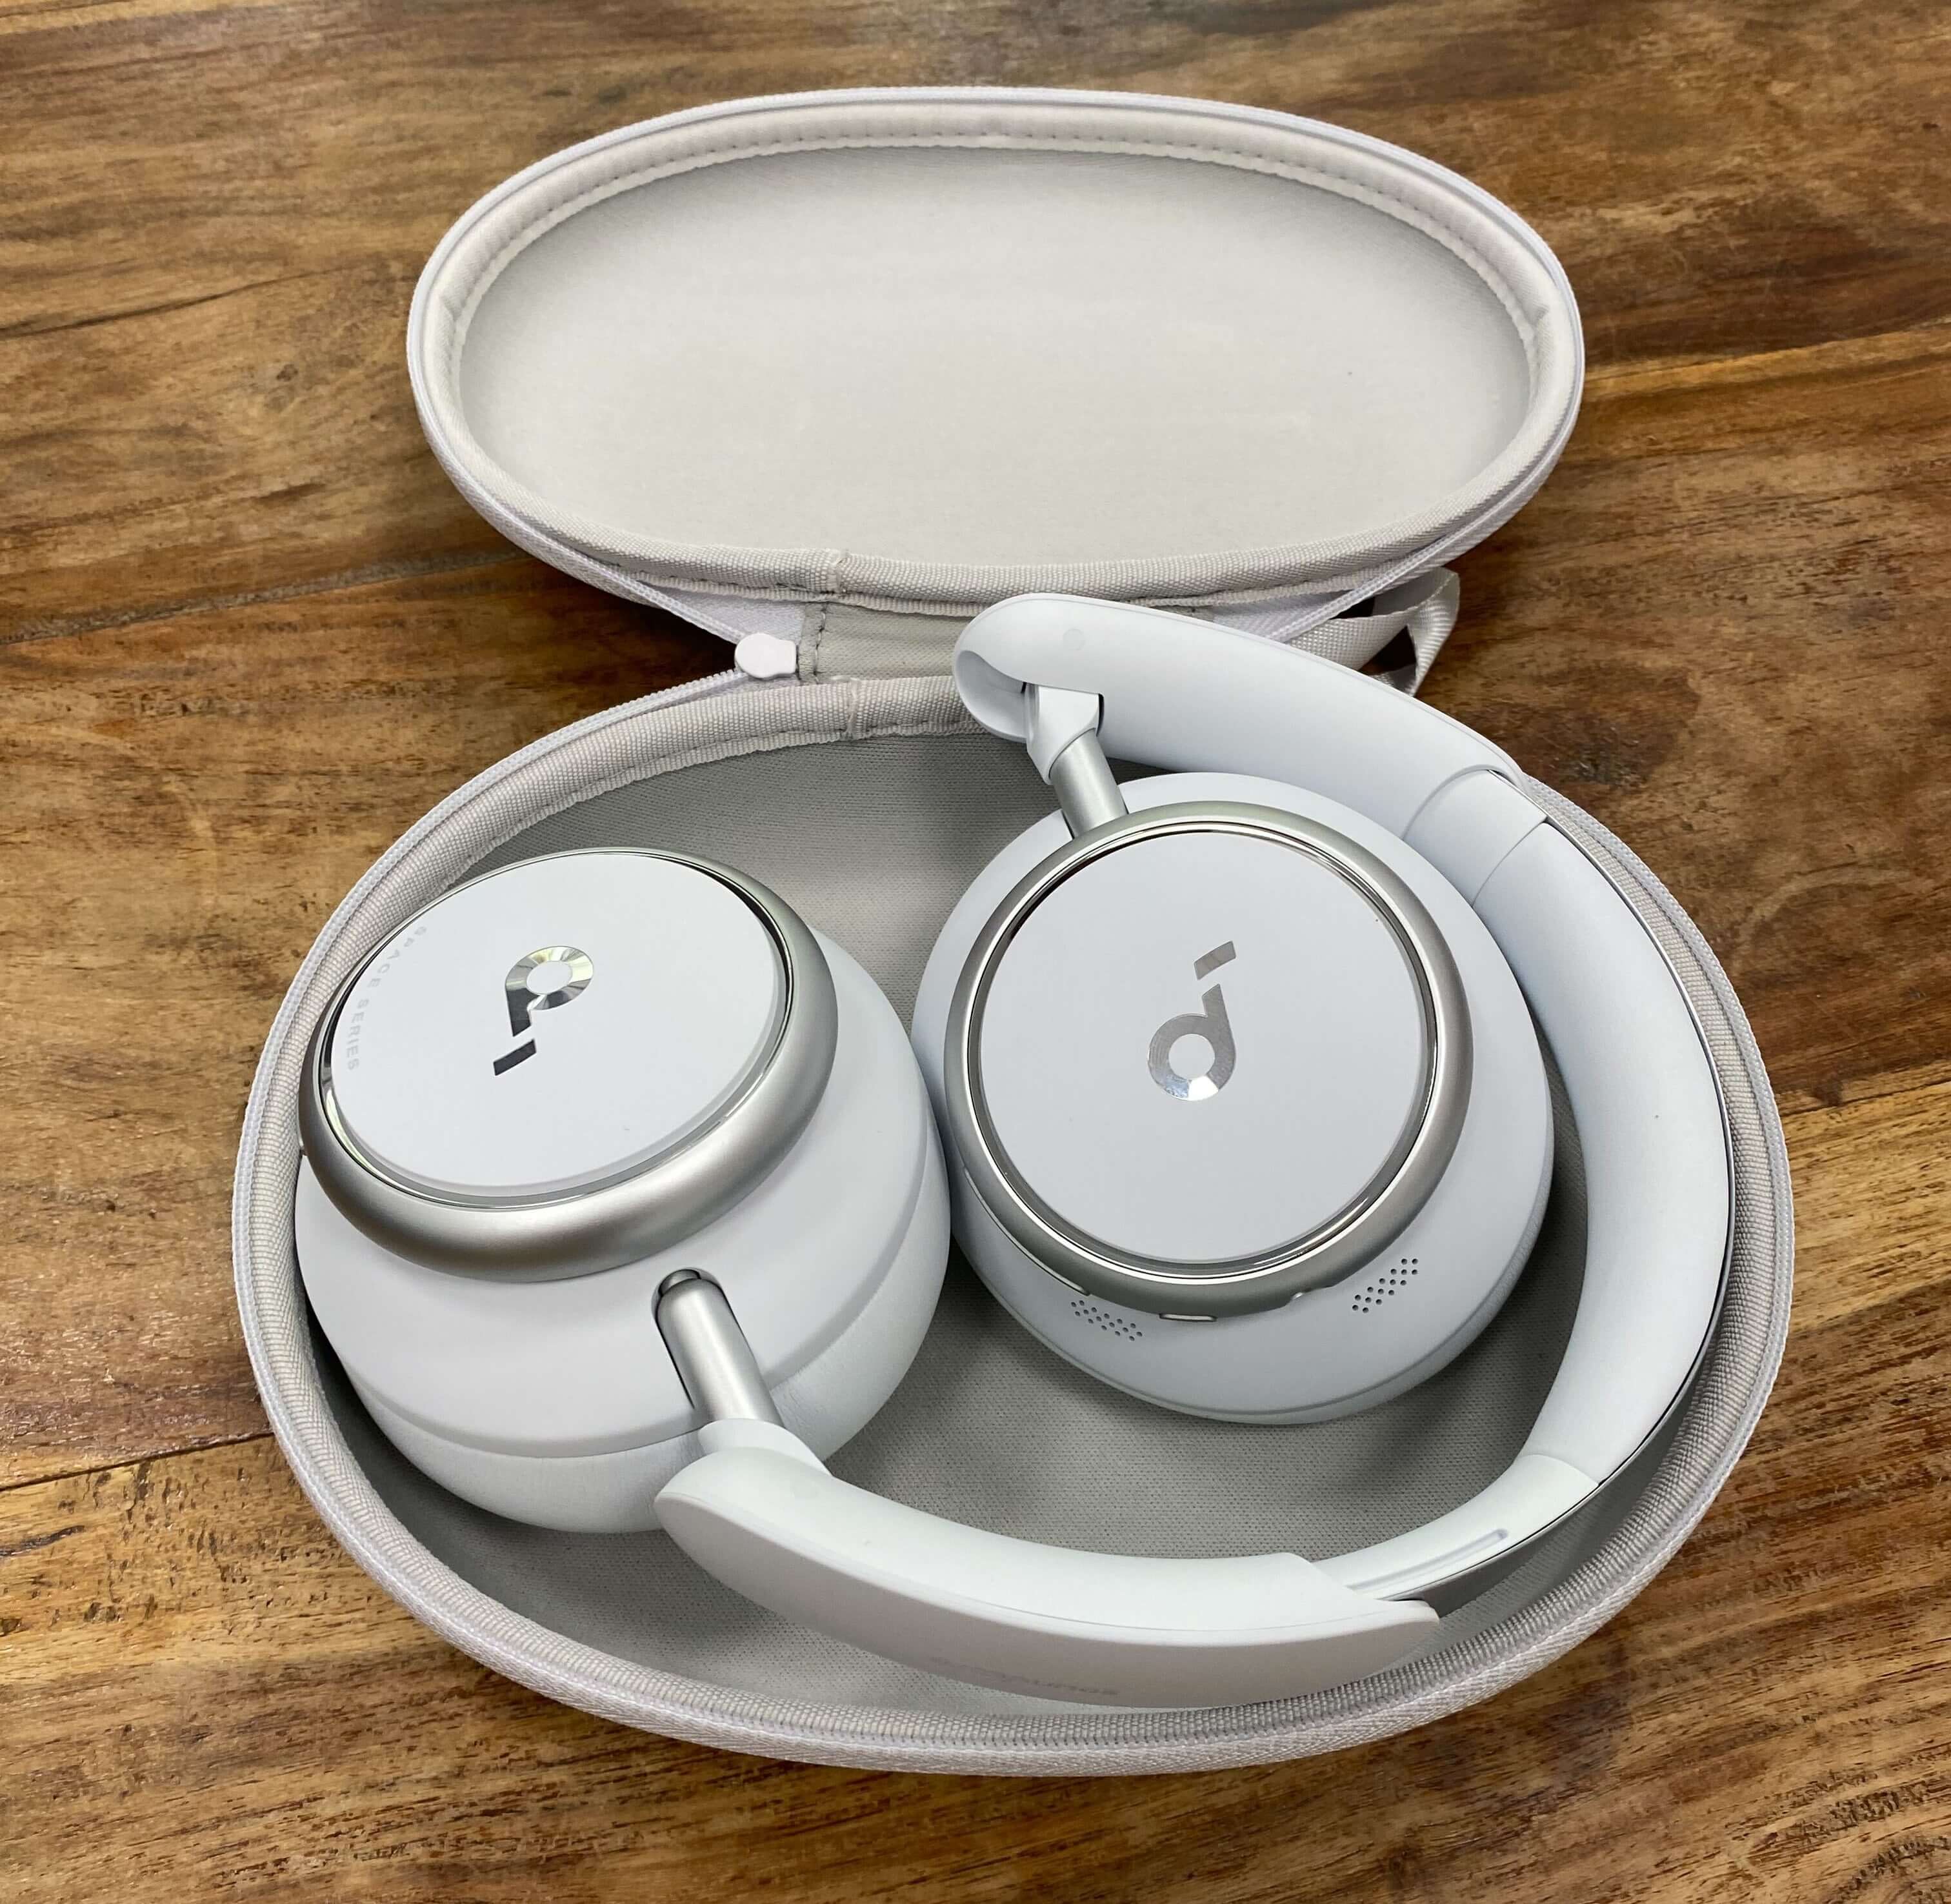 Review: Soundcore Space Q45 headphones - a great listening experience ...